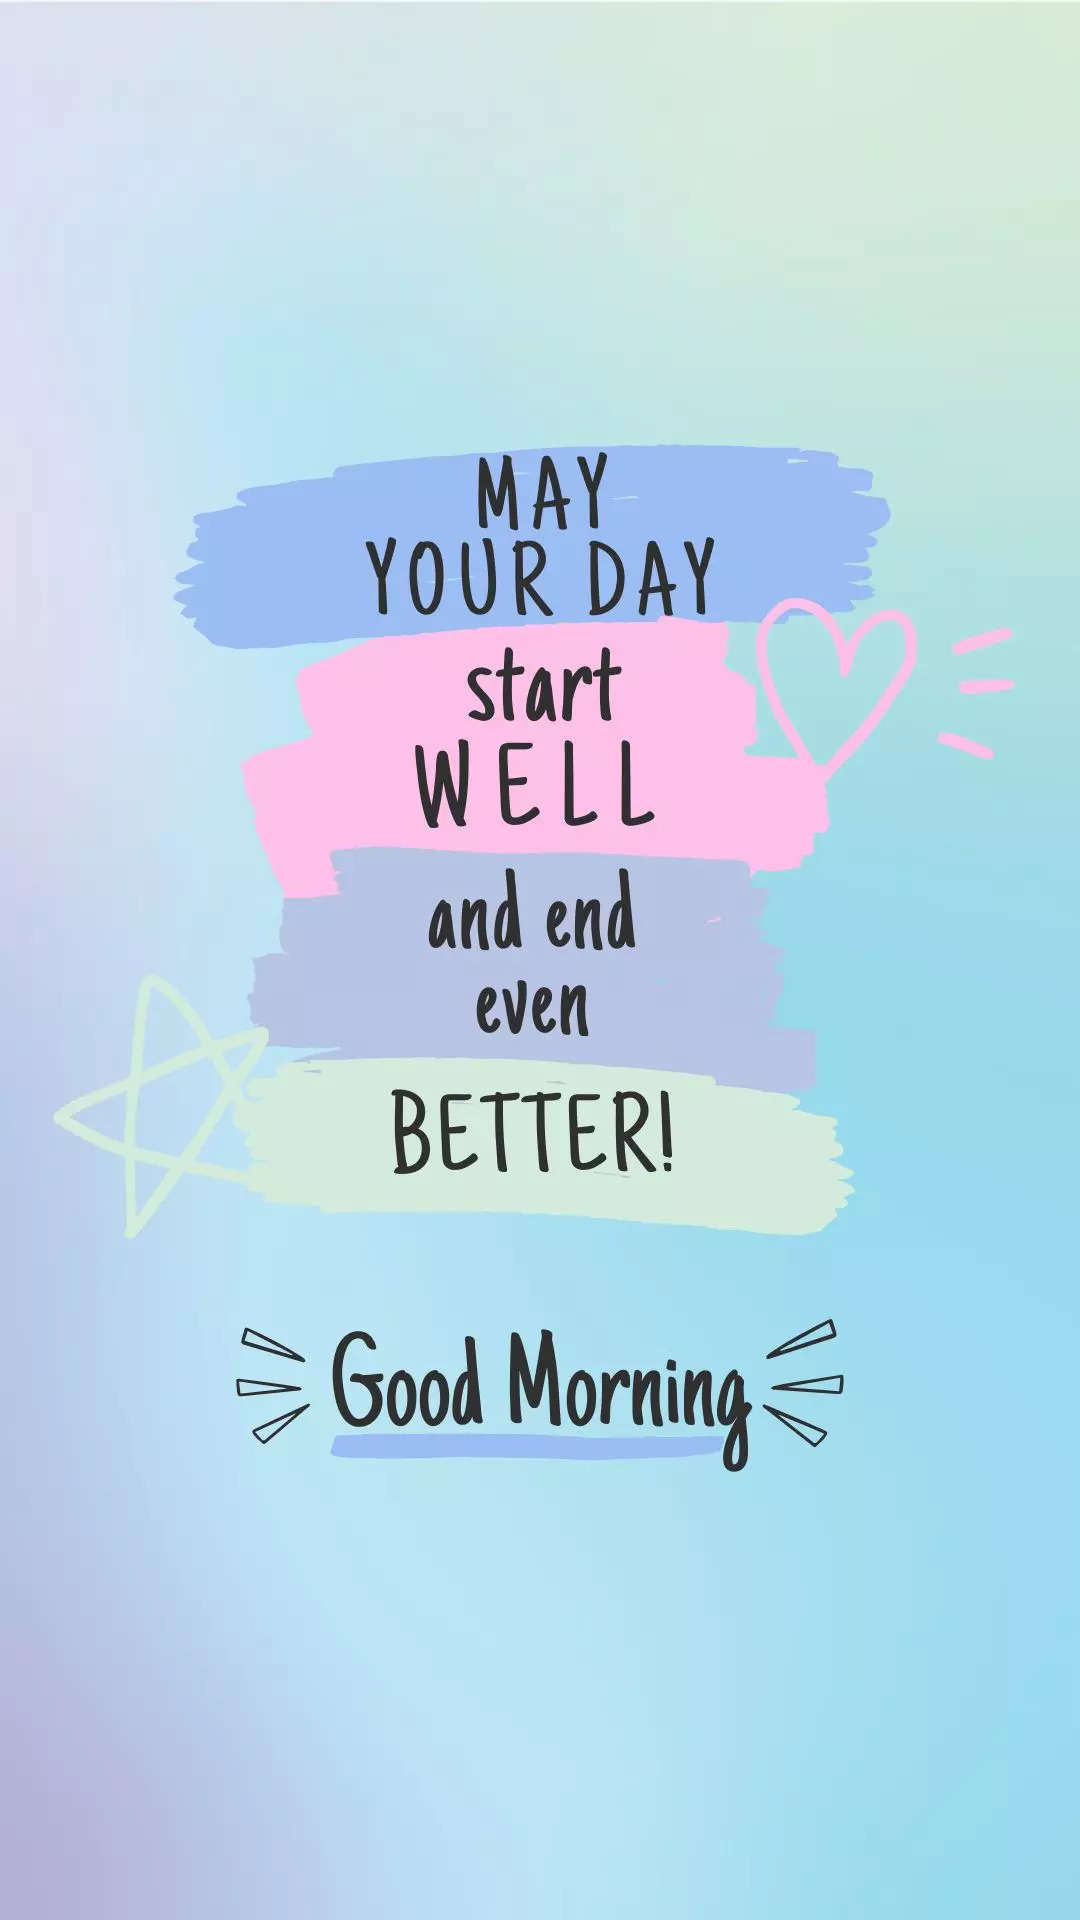 Inspiring Good Morning Quotes And Thursday Wishes, Images For Whatsapp |  Viral News, Times Now